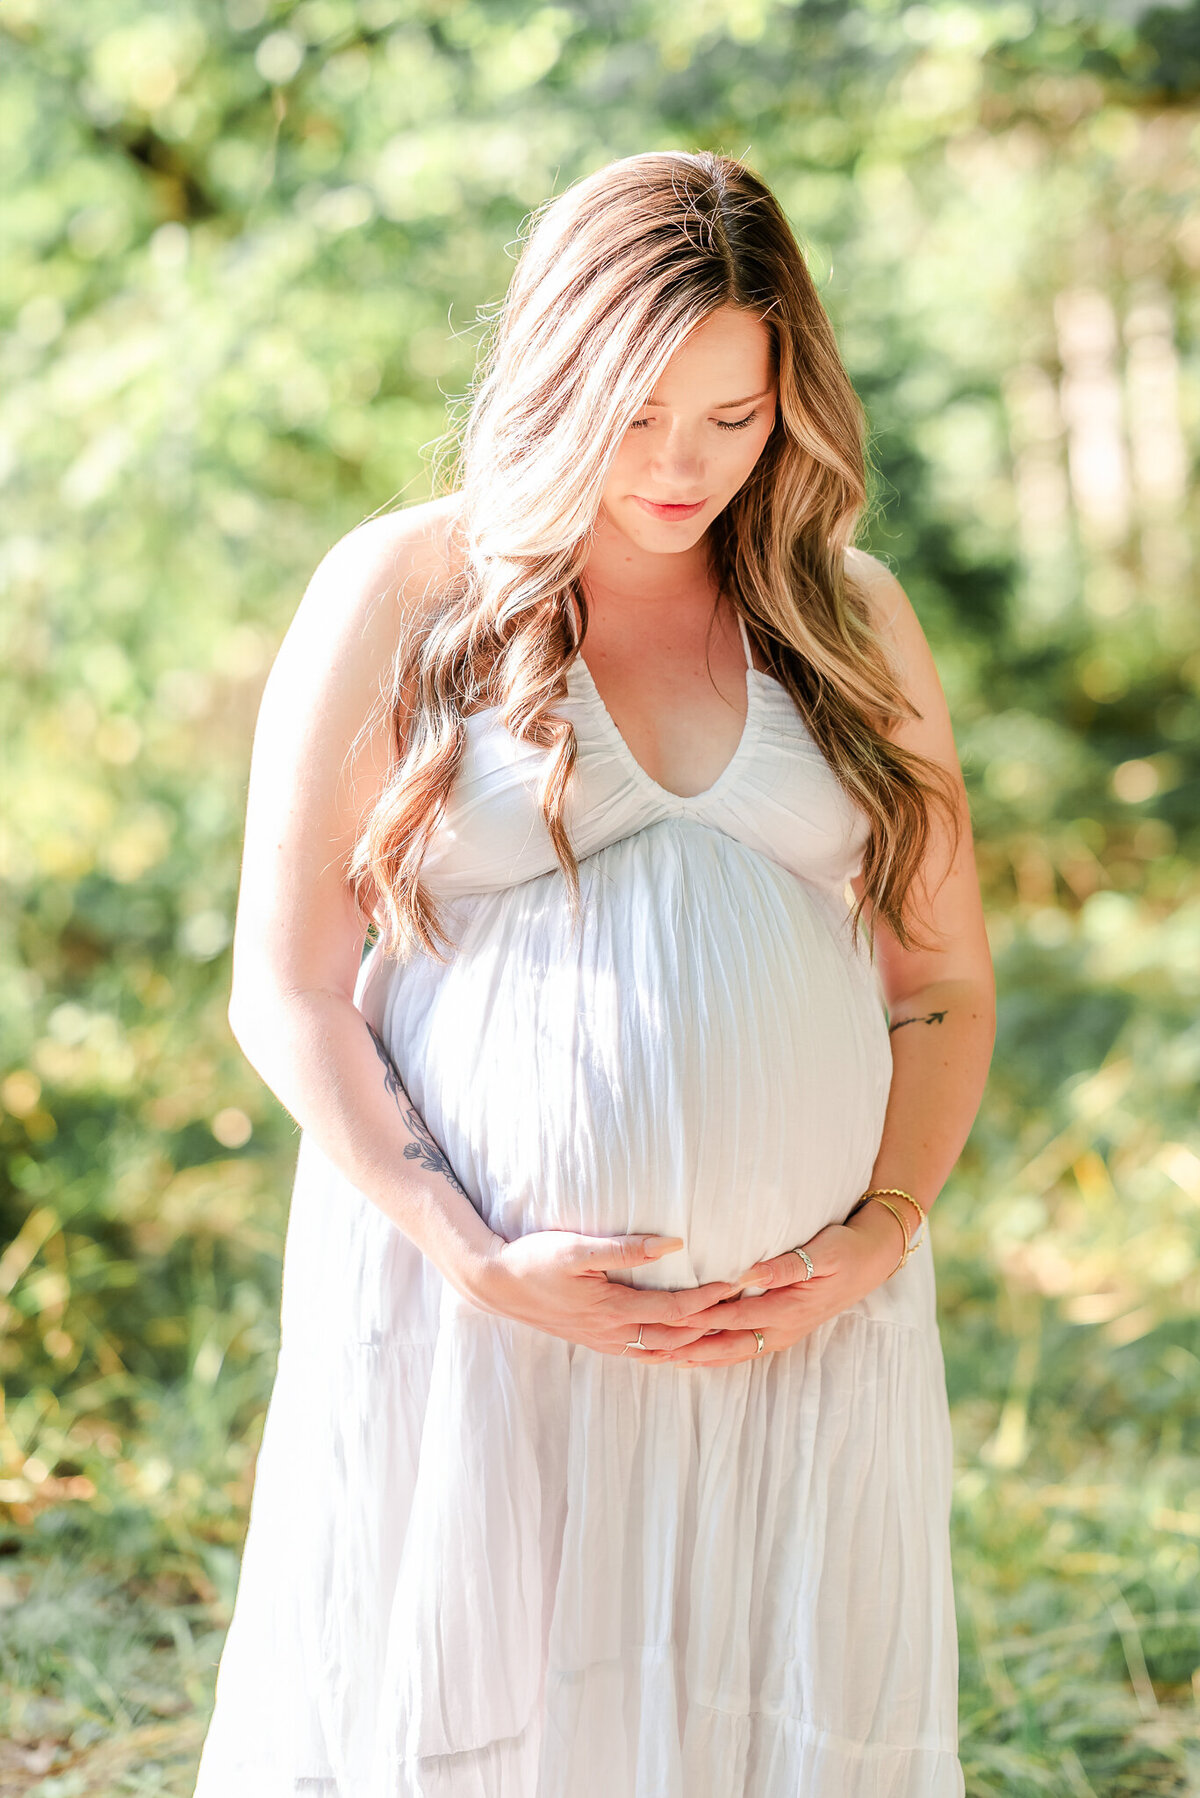 A pregnant woman cradles her belly during her Chesapeake maternity photography session. She wears a simple white dress.